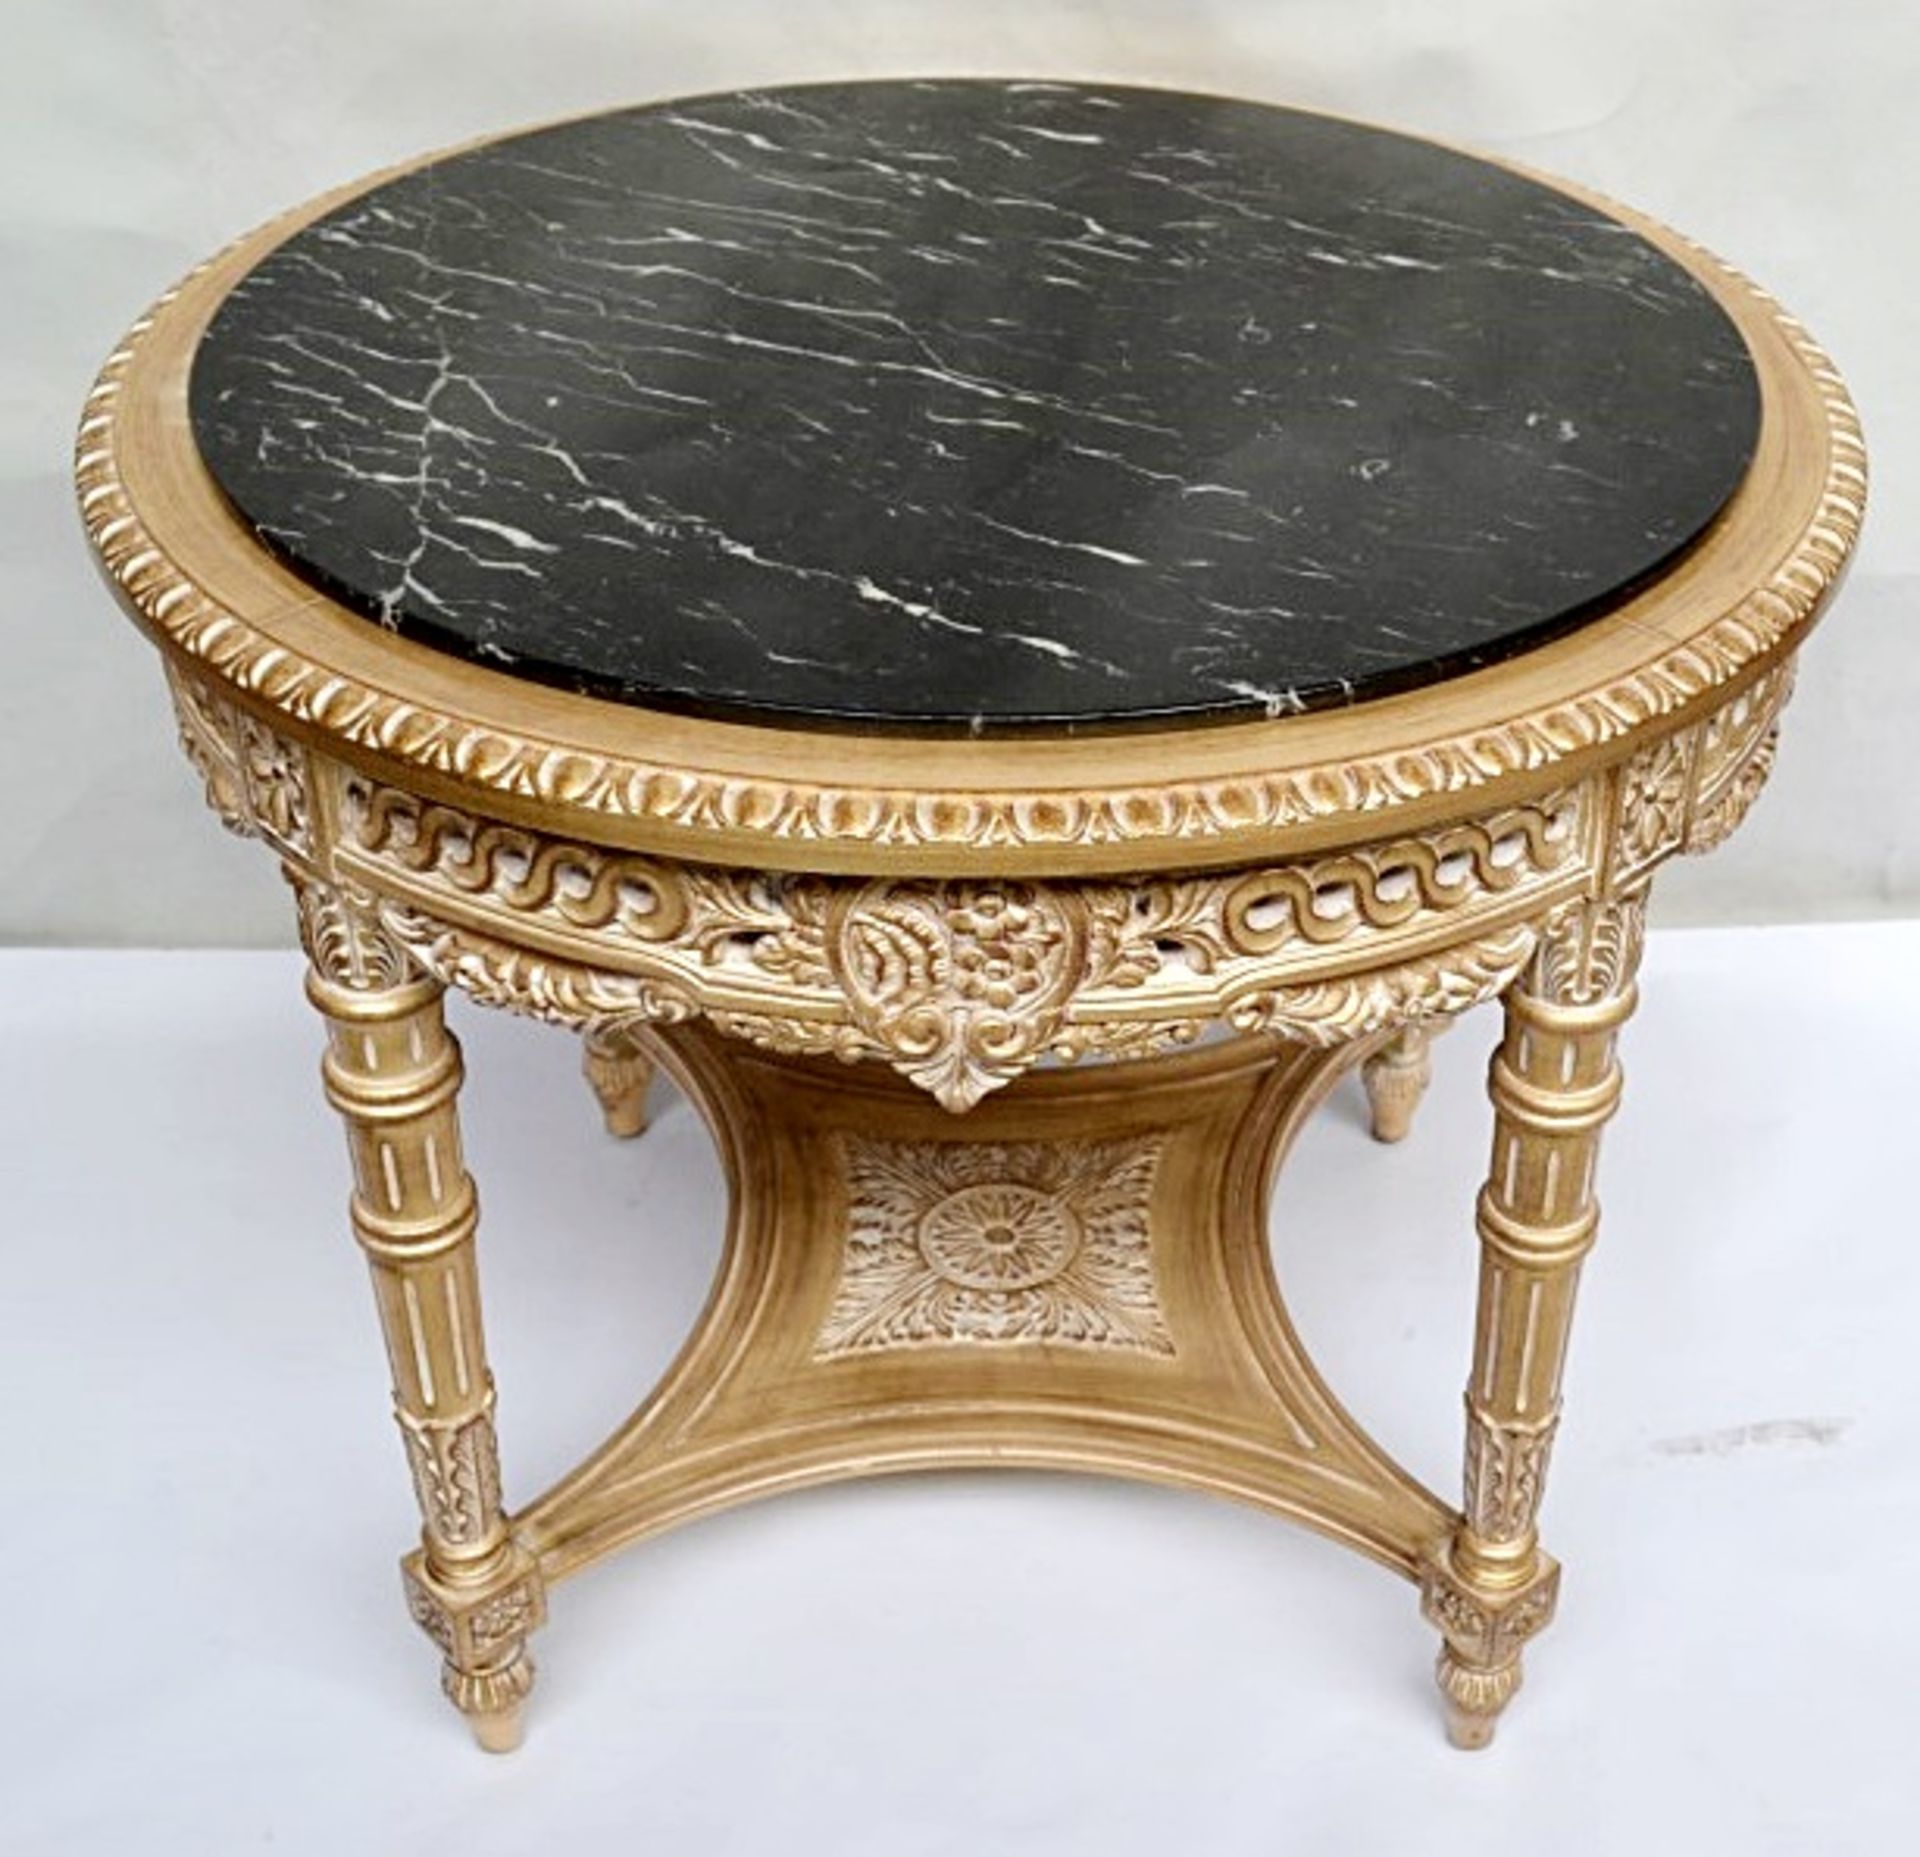 1 x ANGELO CAPPELLINI Marble Topped Wooden Coffee Table In Gold - Dimensions: H76cm x Diameter - Image 5 of 8